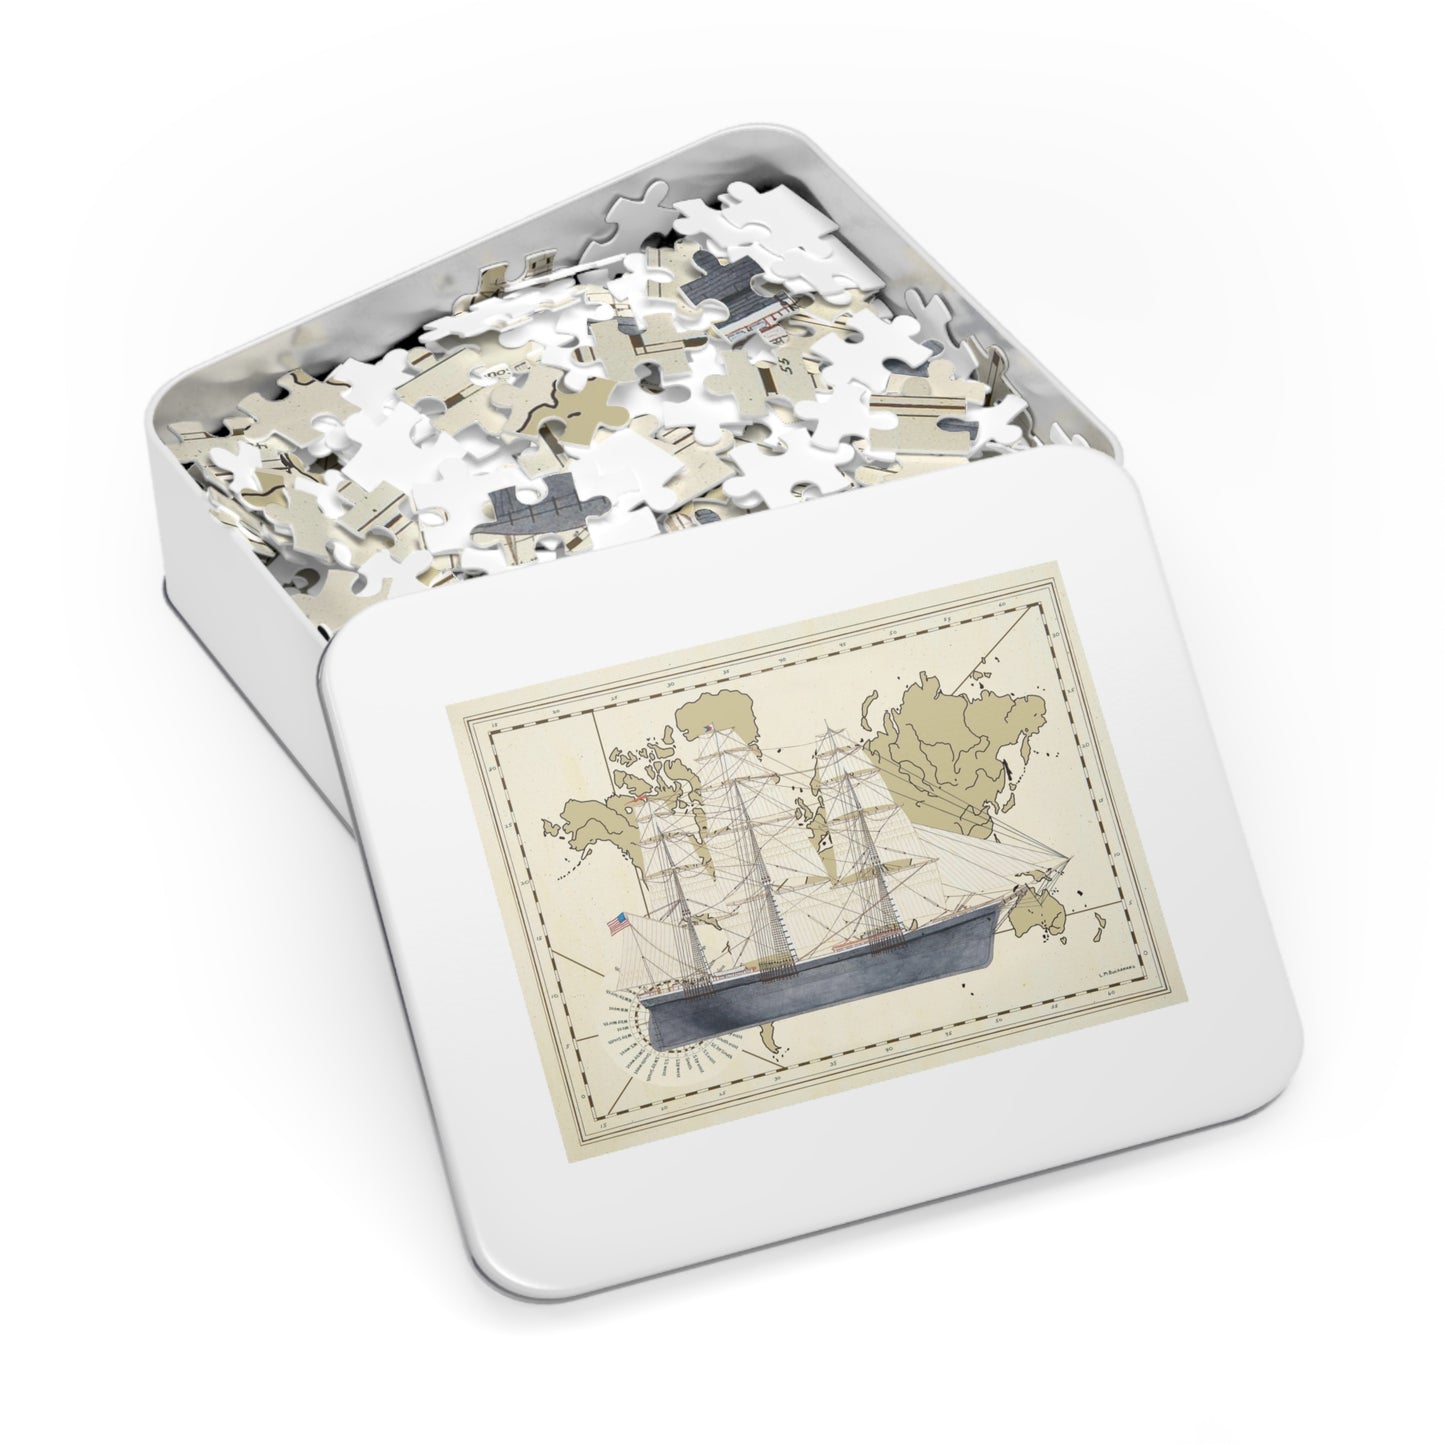 Clipper Ship Flying Cloud Jigsaw Puzzle